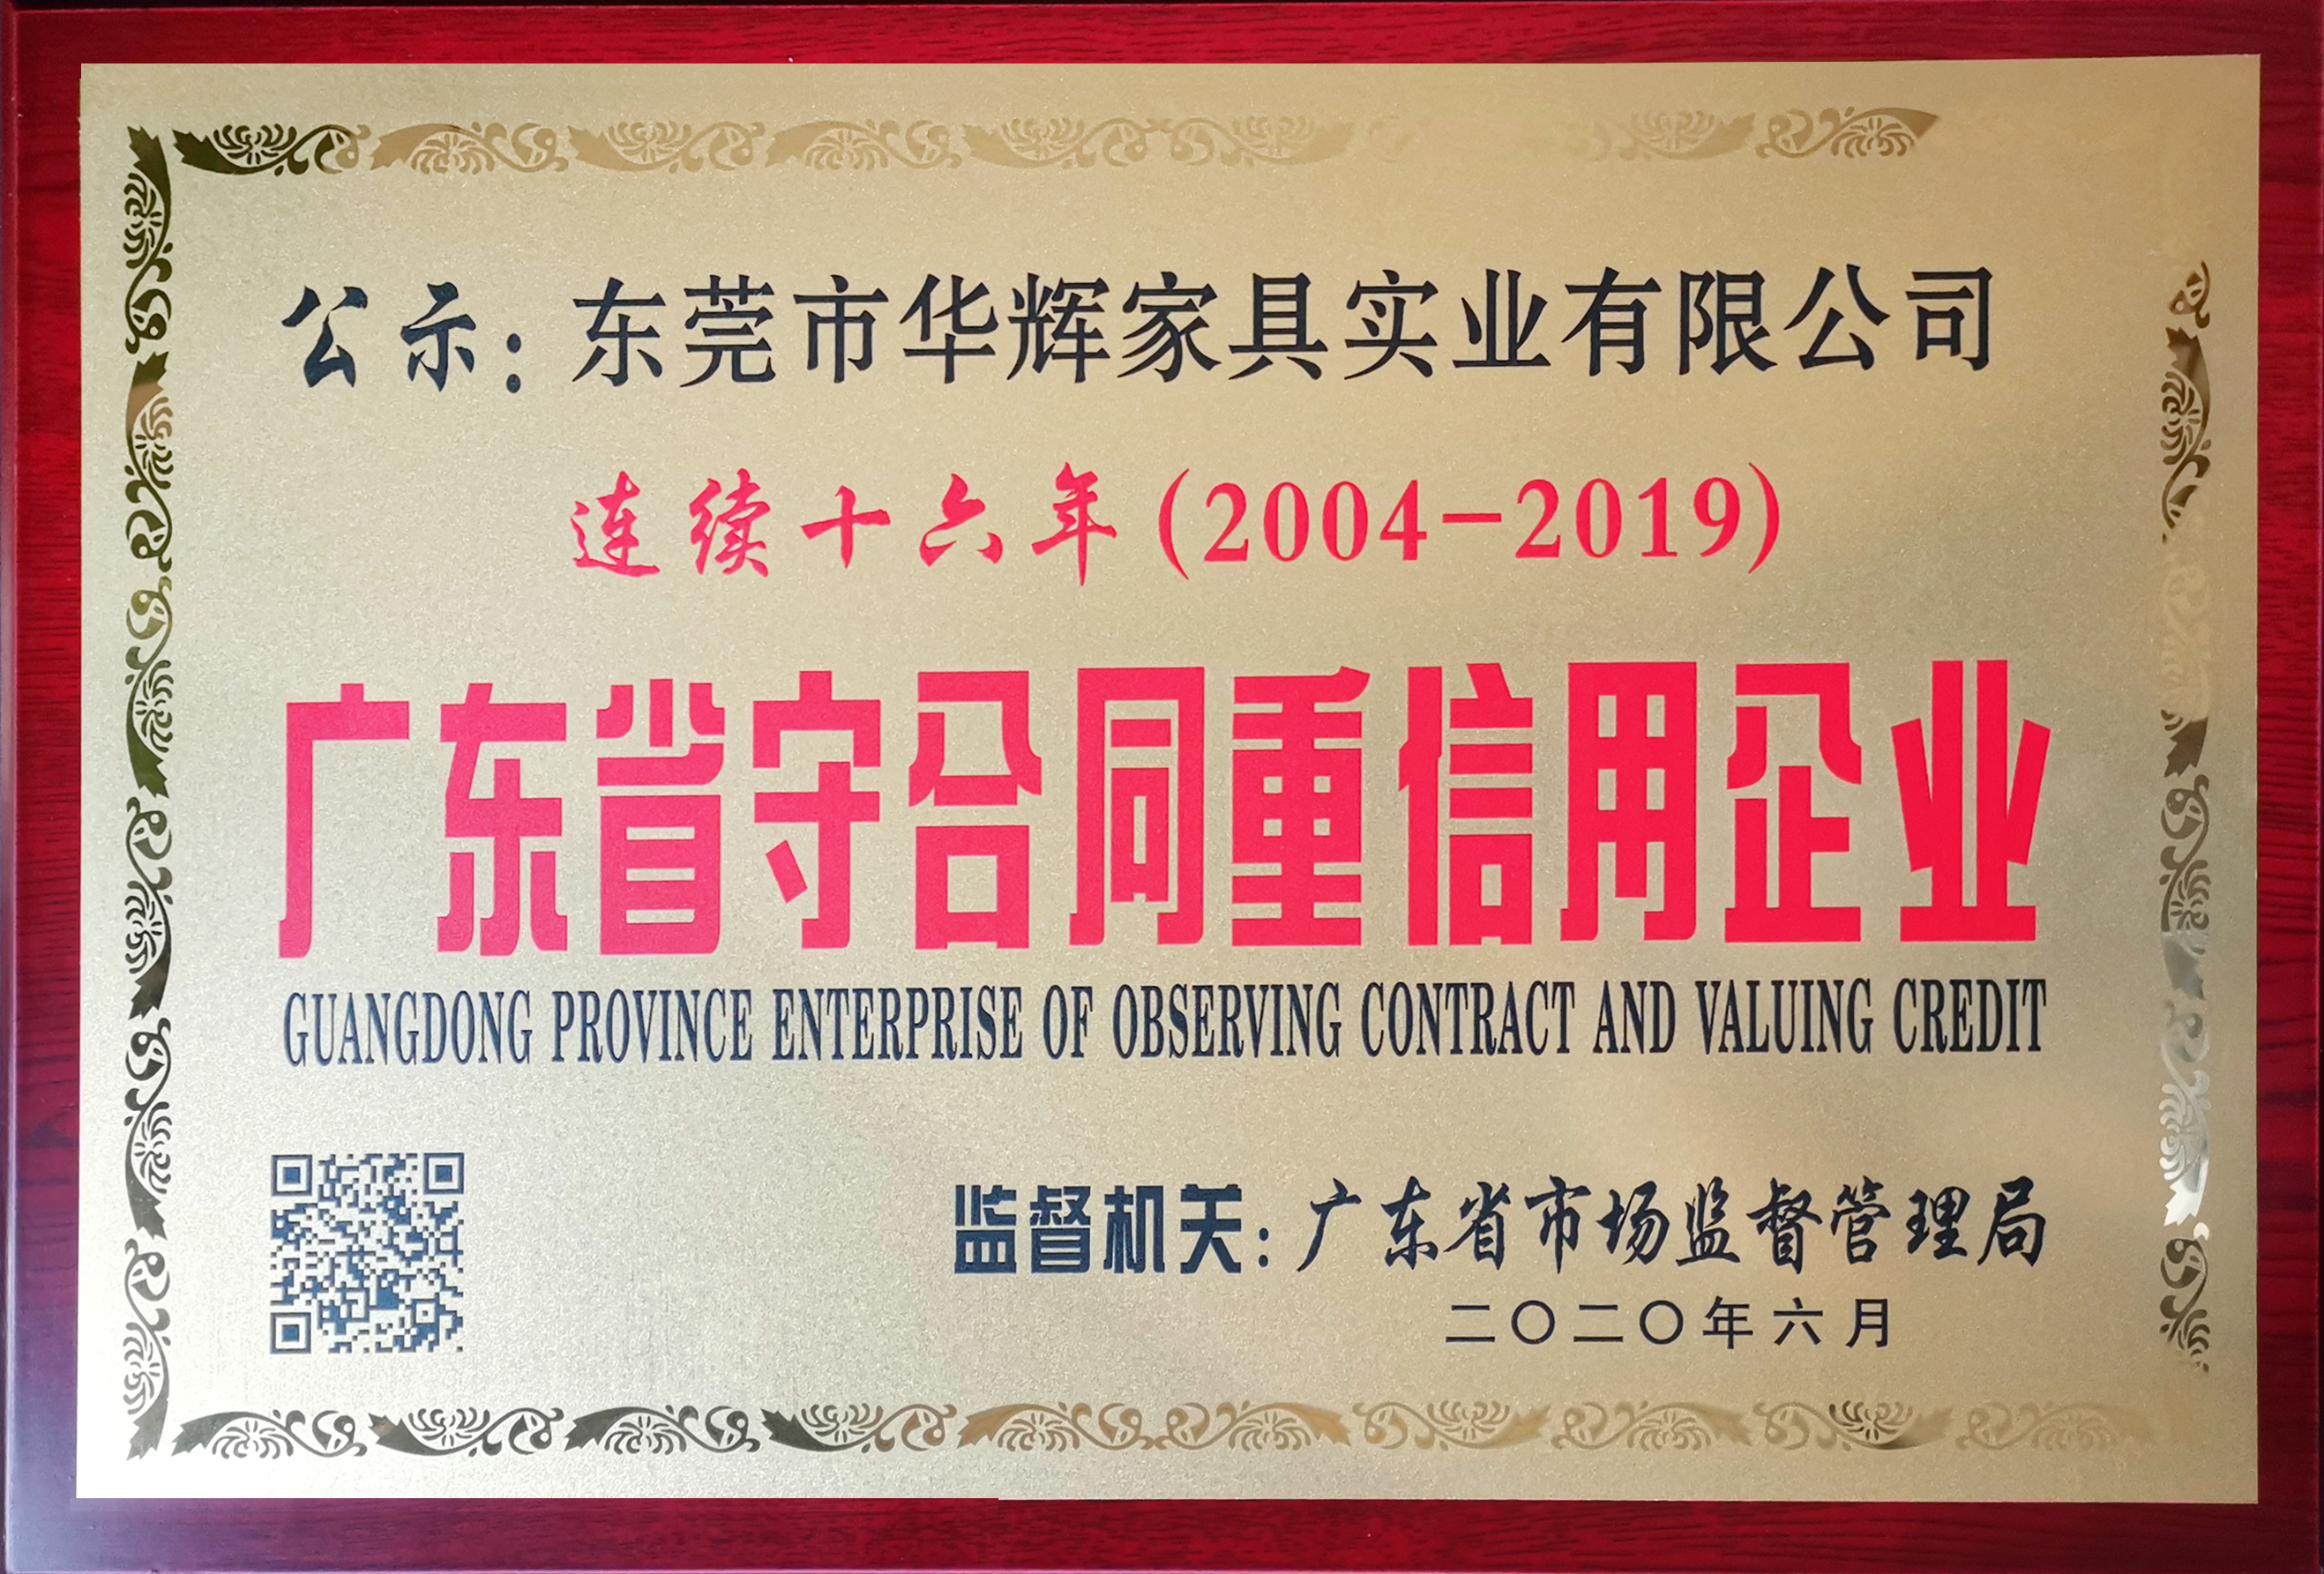 For 16 consecutive years, Guangdong Province has been a contract-abiding and credit-worthy enterprise